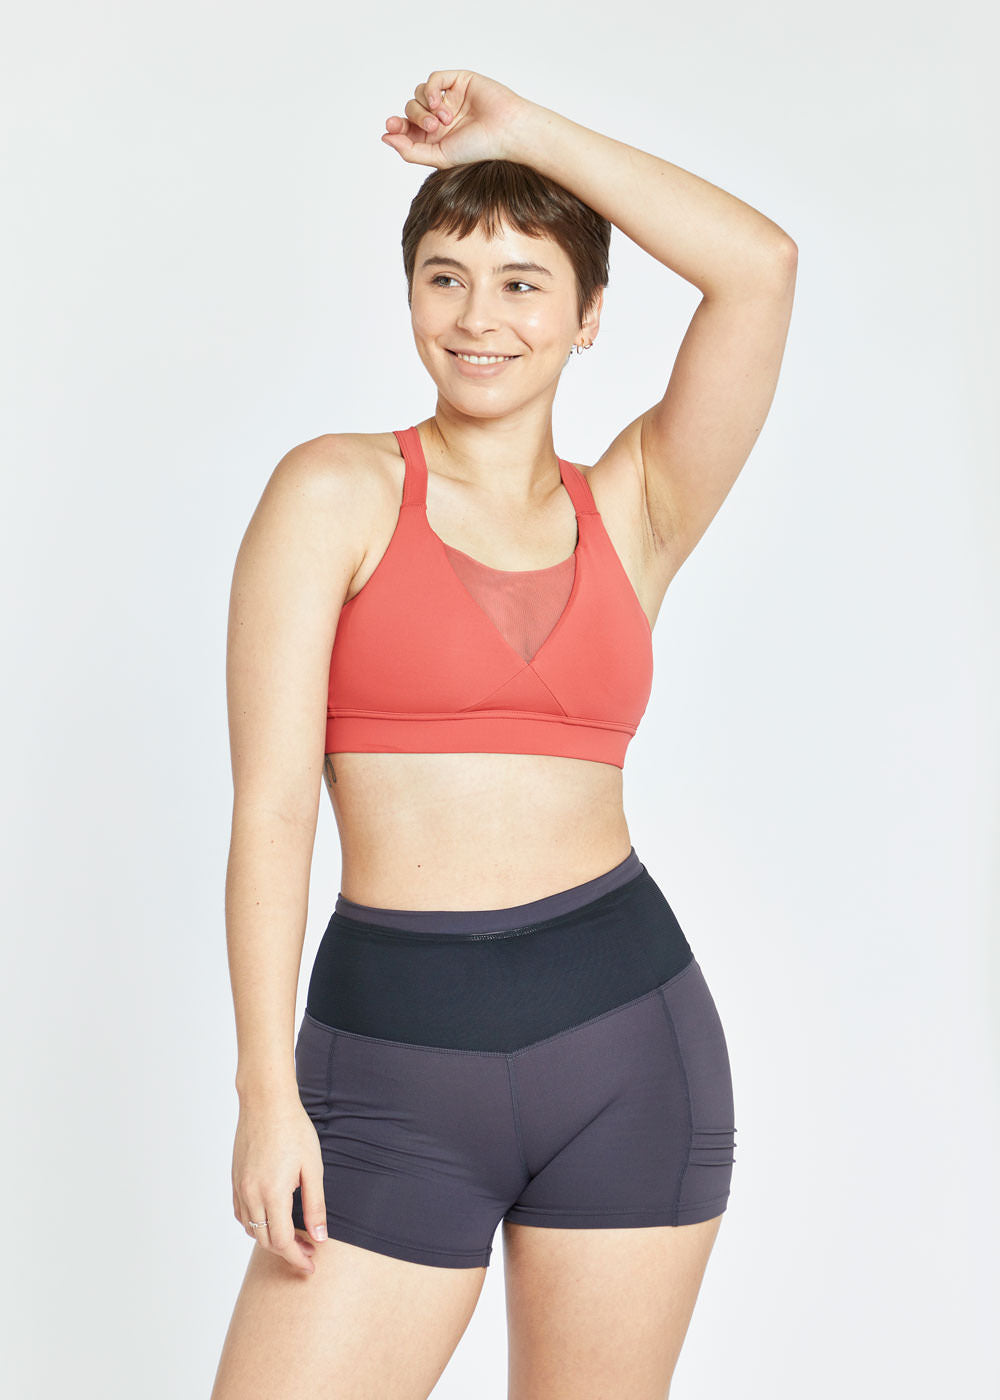 She has something to SMILE 😊 about! The Oiselle Pockito Bra is